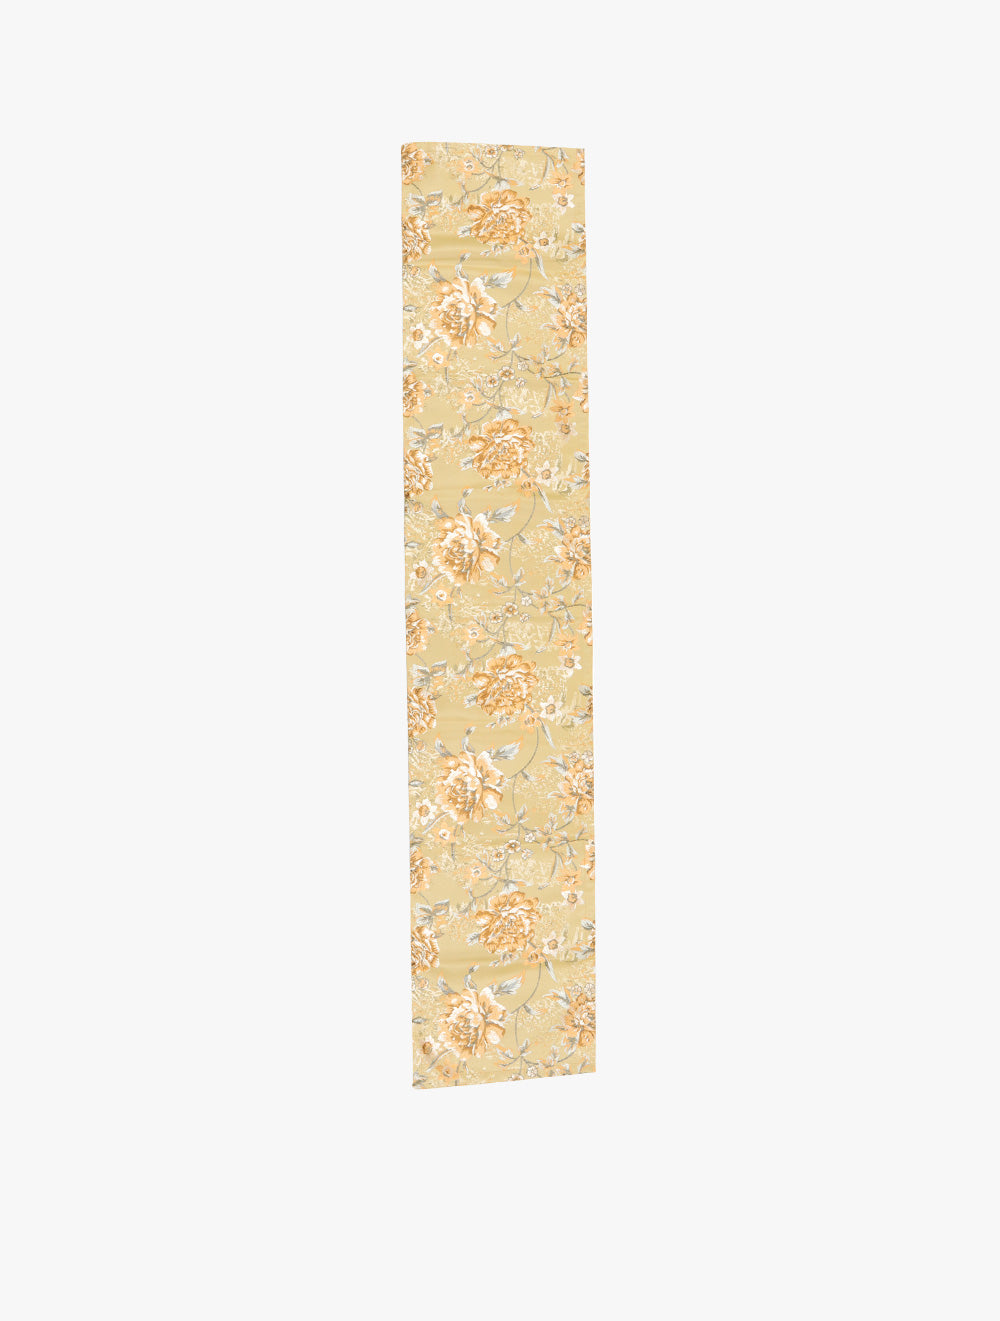 GENI HOME FURNISHING
Le Atelier - Quince Table Runner (Large)